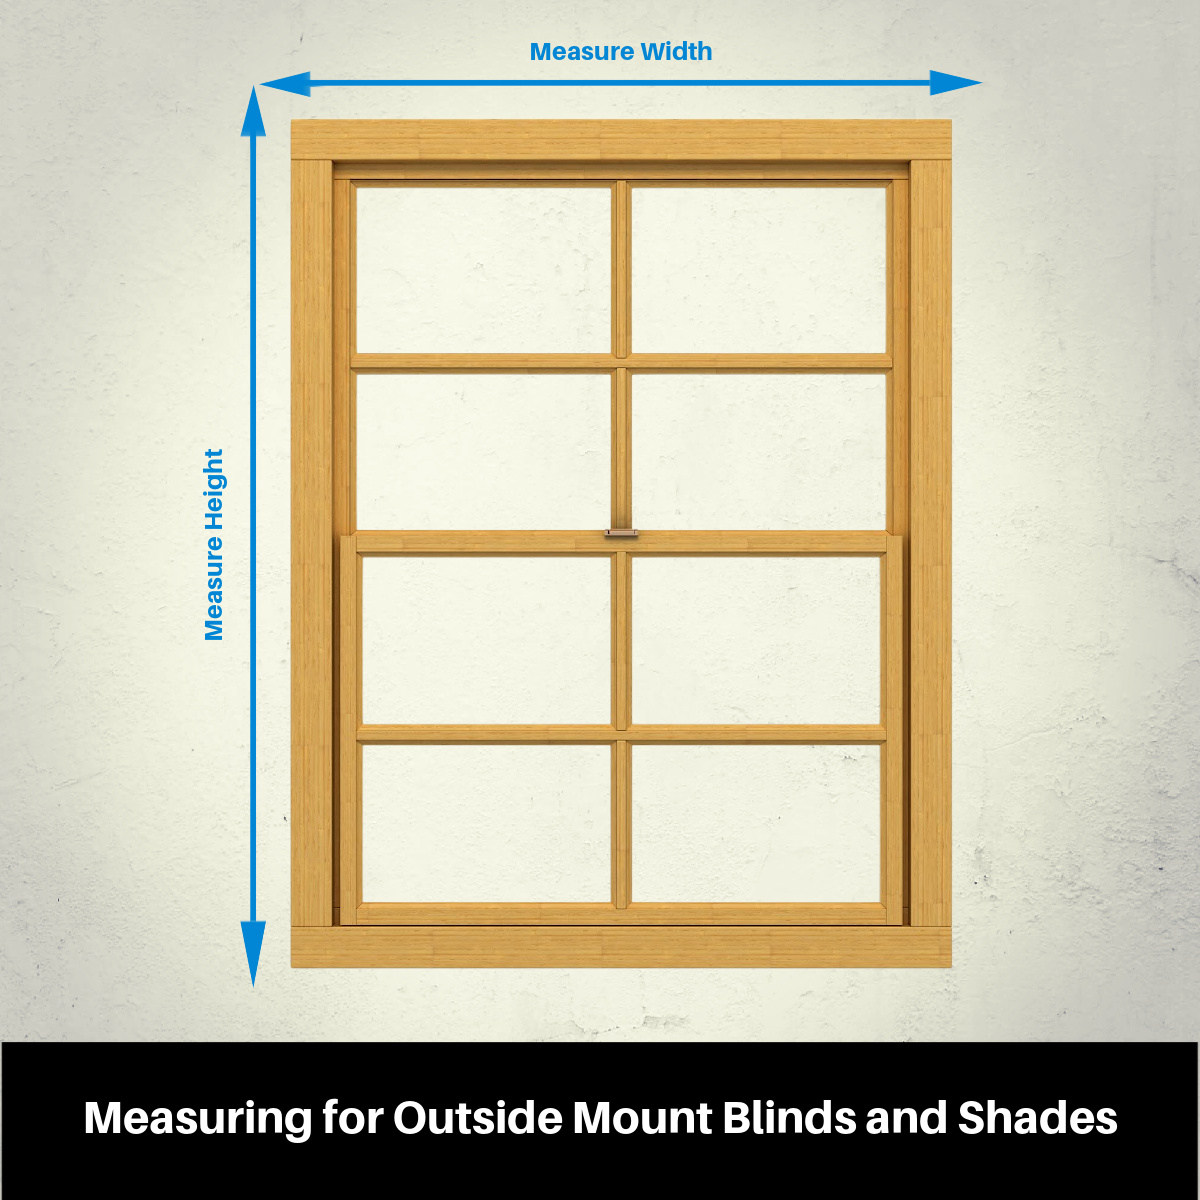 Measuring for Outside Mount Blinds and Shades